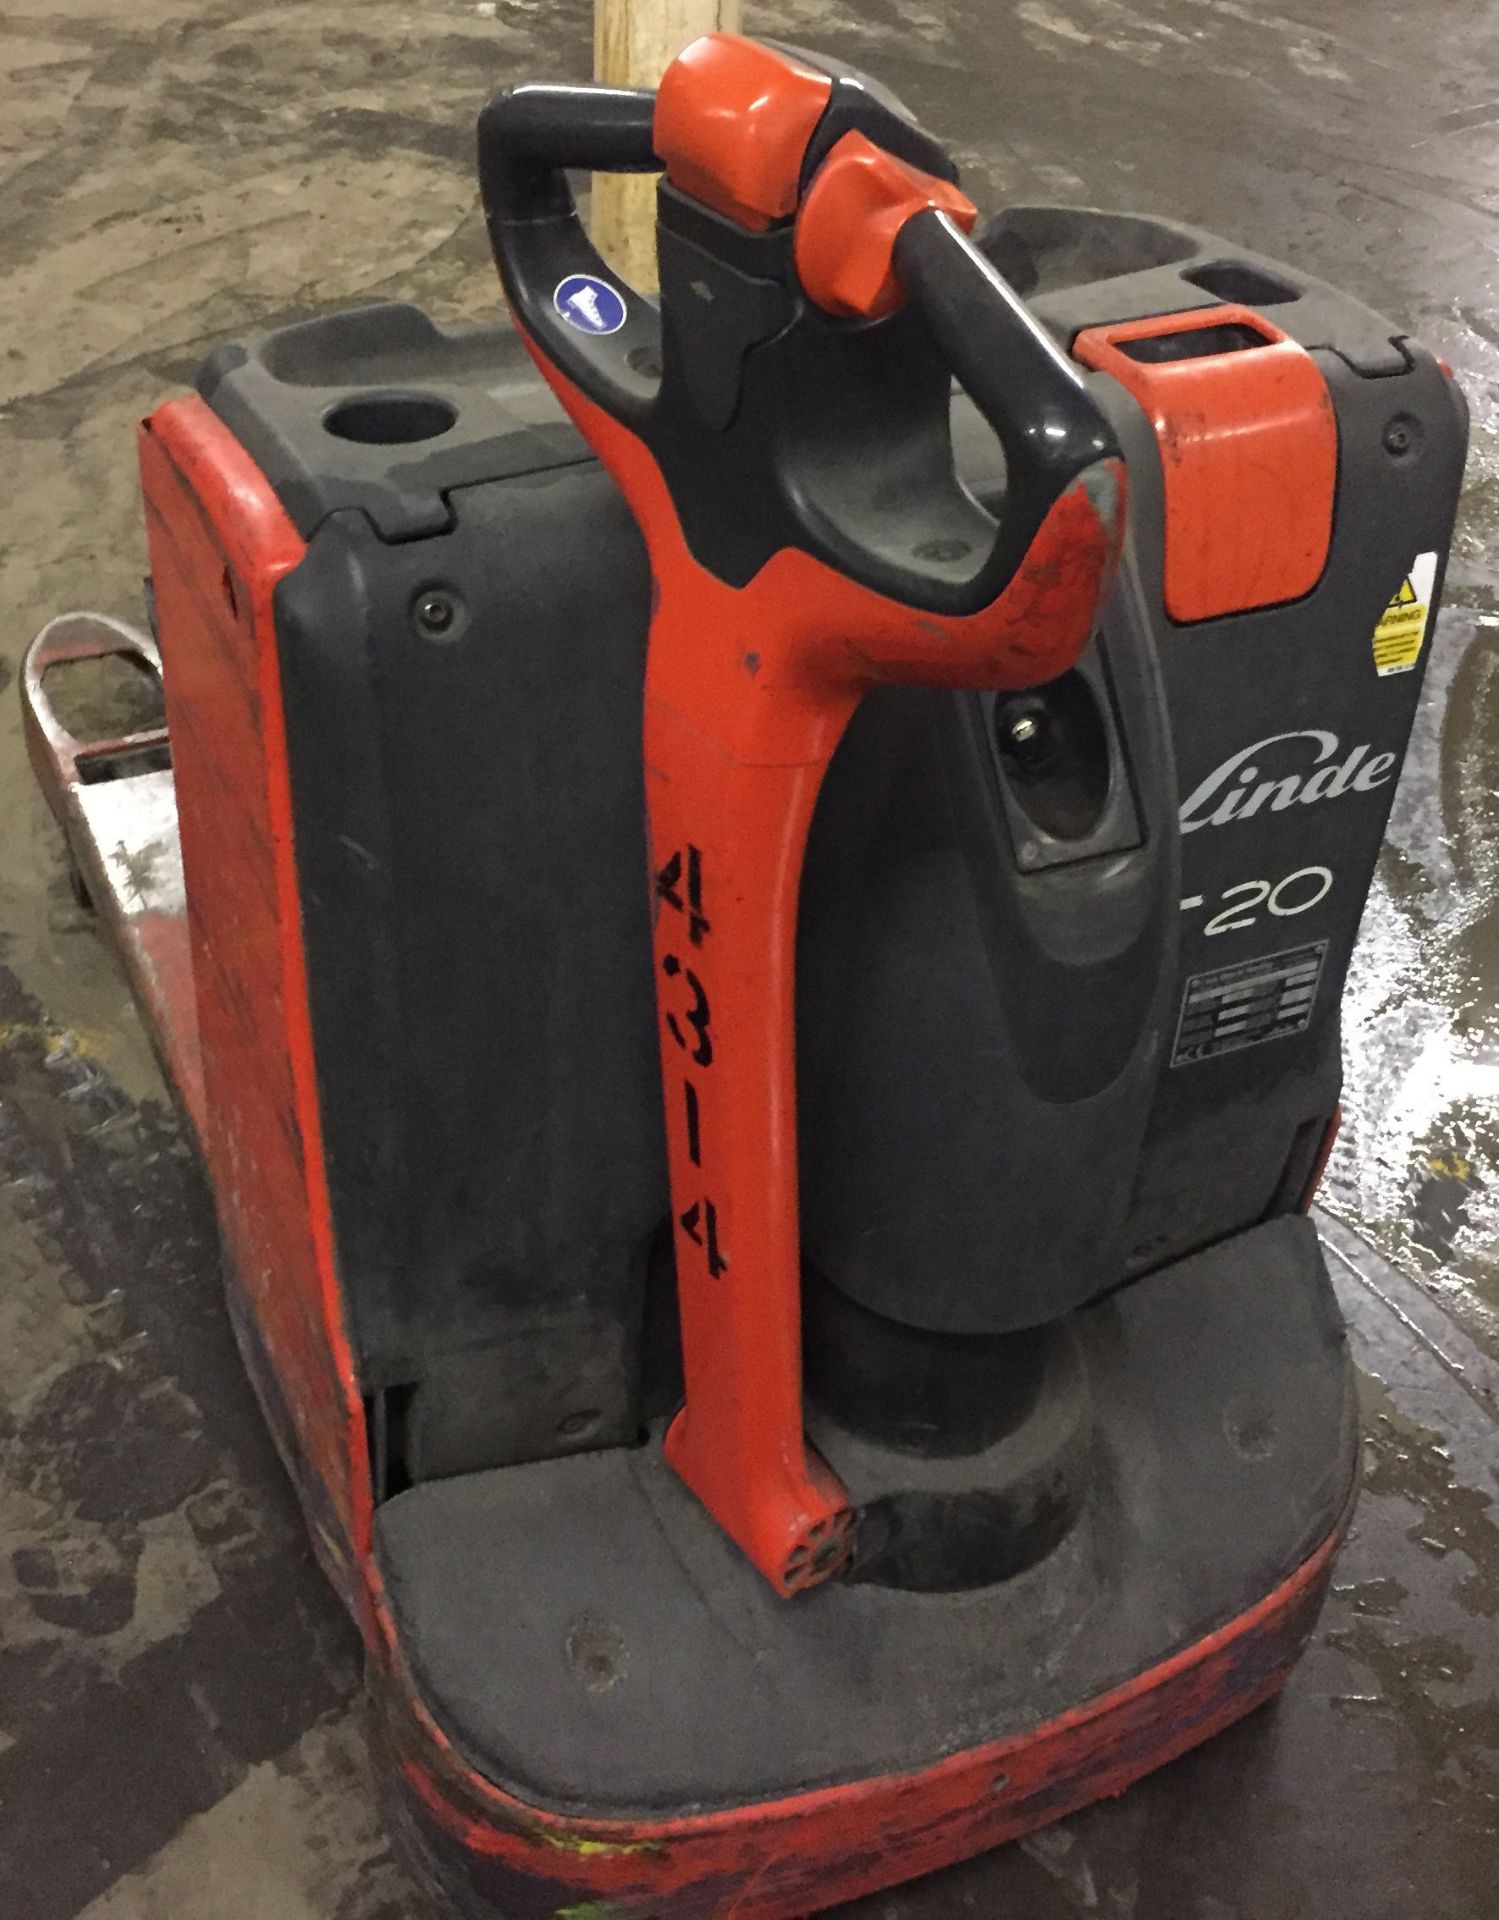 1 x Linde T20 Electric Pallet Truck - Tested and Working - Key and Charger Included - Bolton BL1 - Image 4 of 9